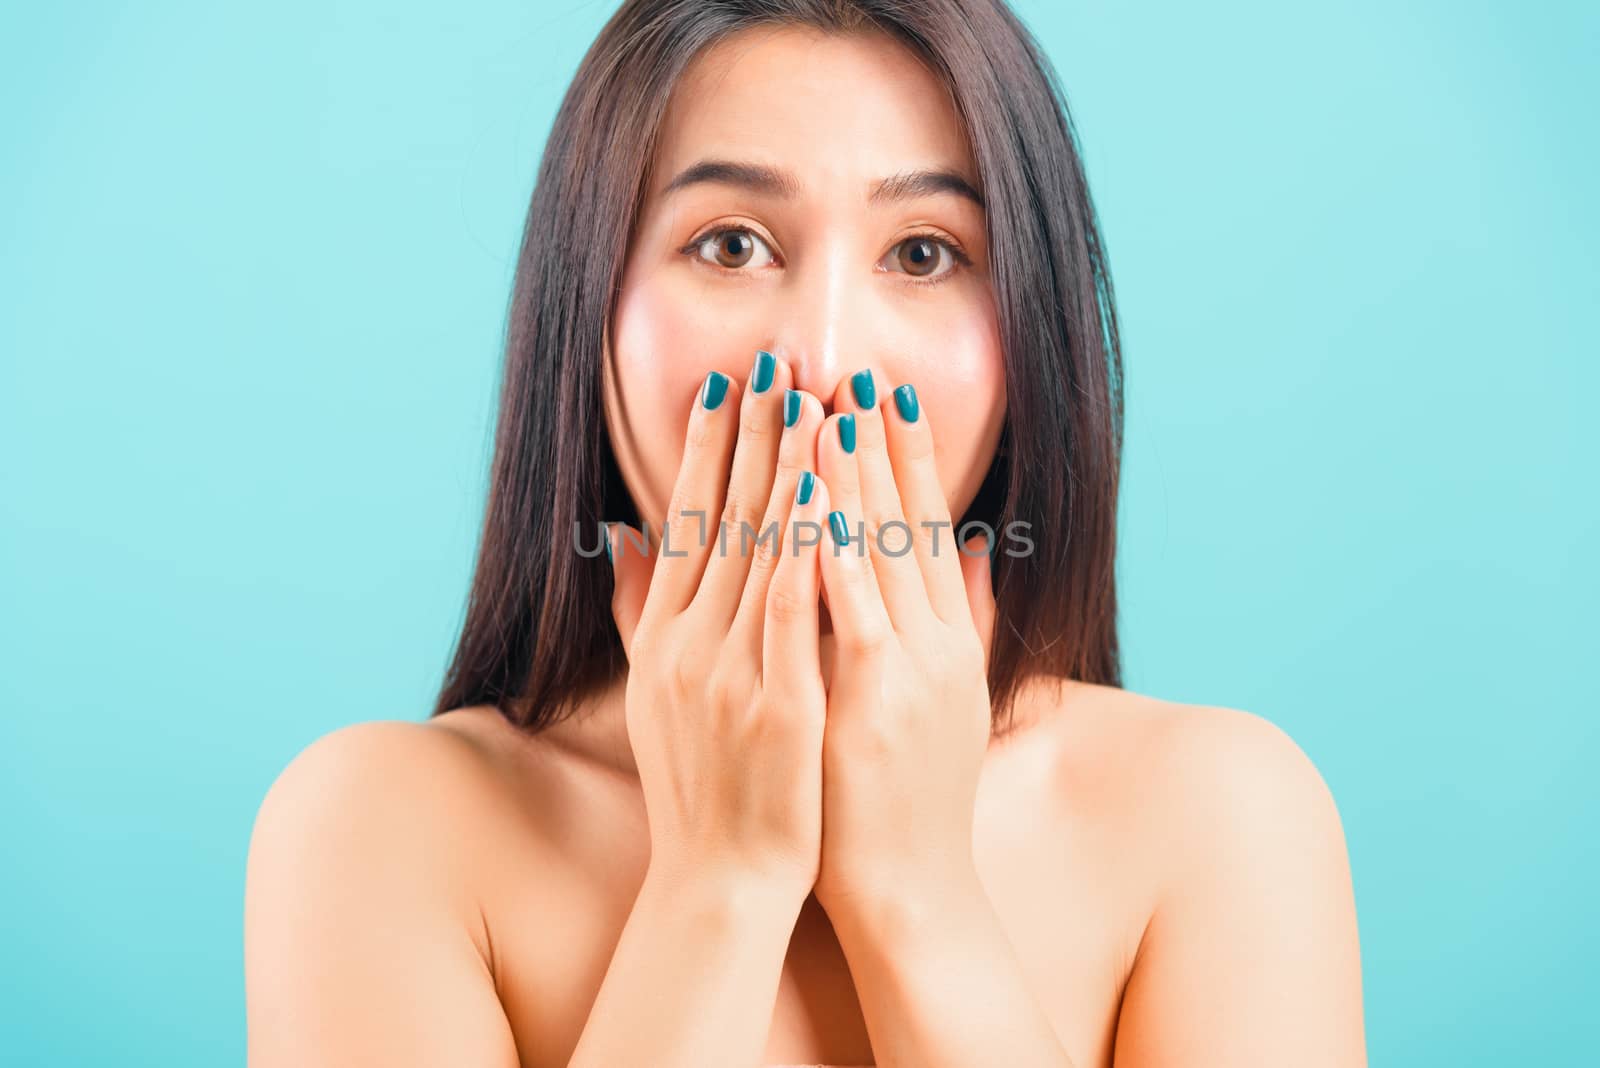 Asian beautiful woman her shocked or surprised her use hands close mouth staring eyes look camera on blue background, with copy space for text